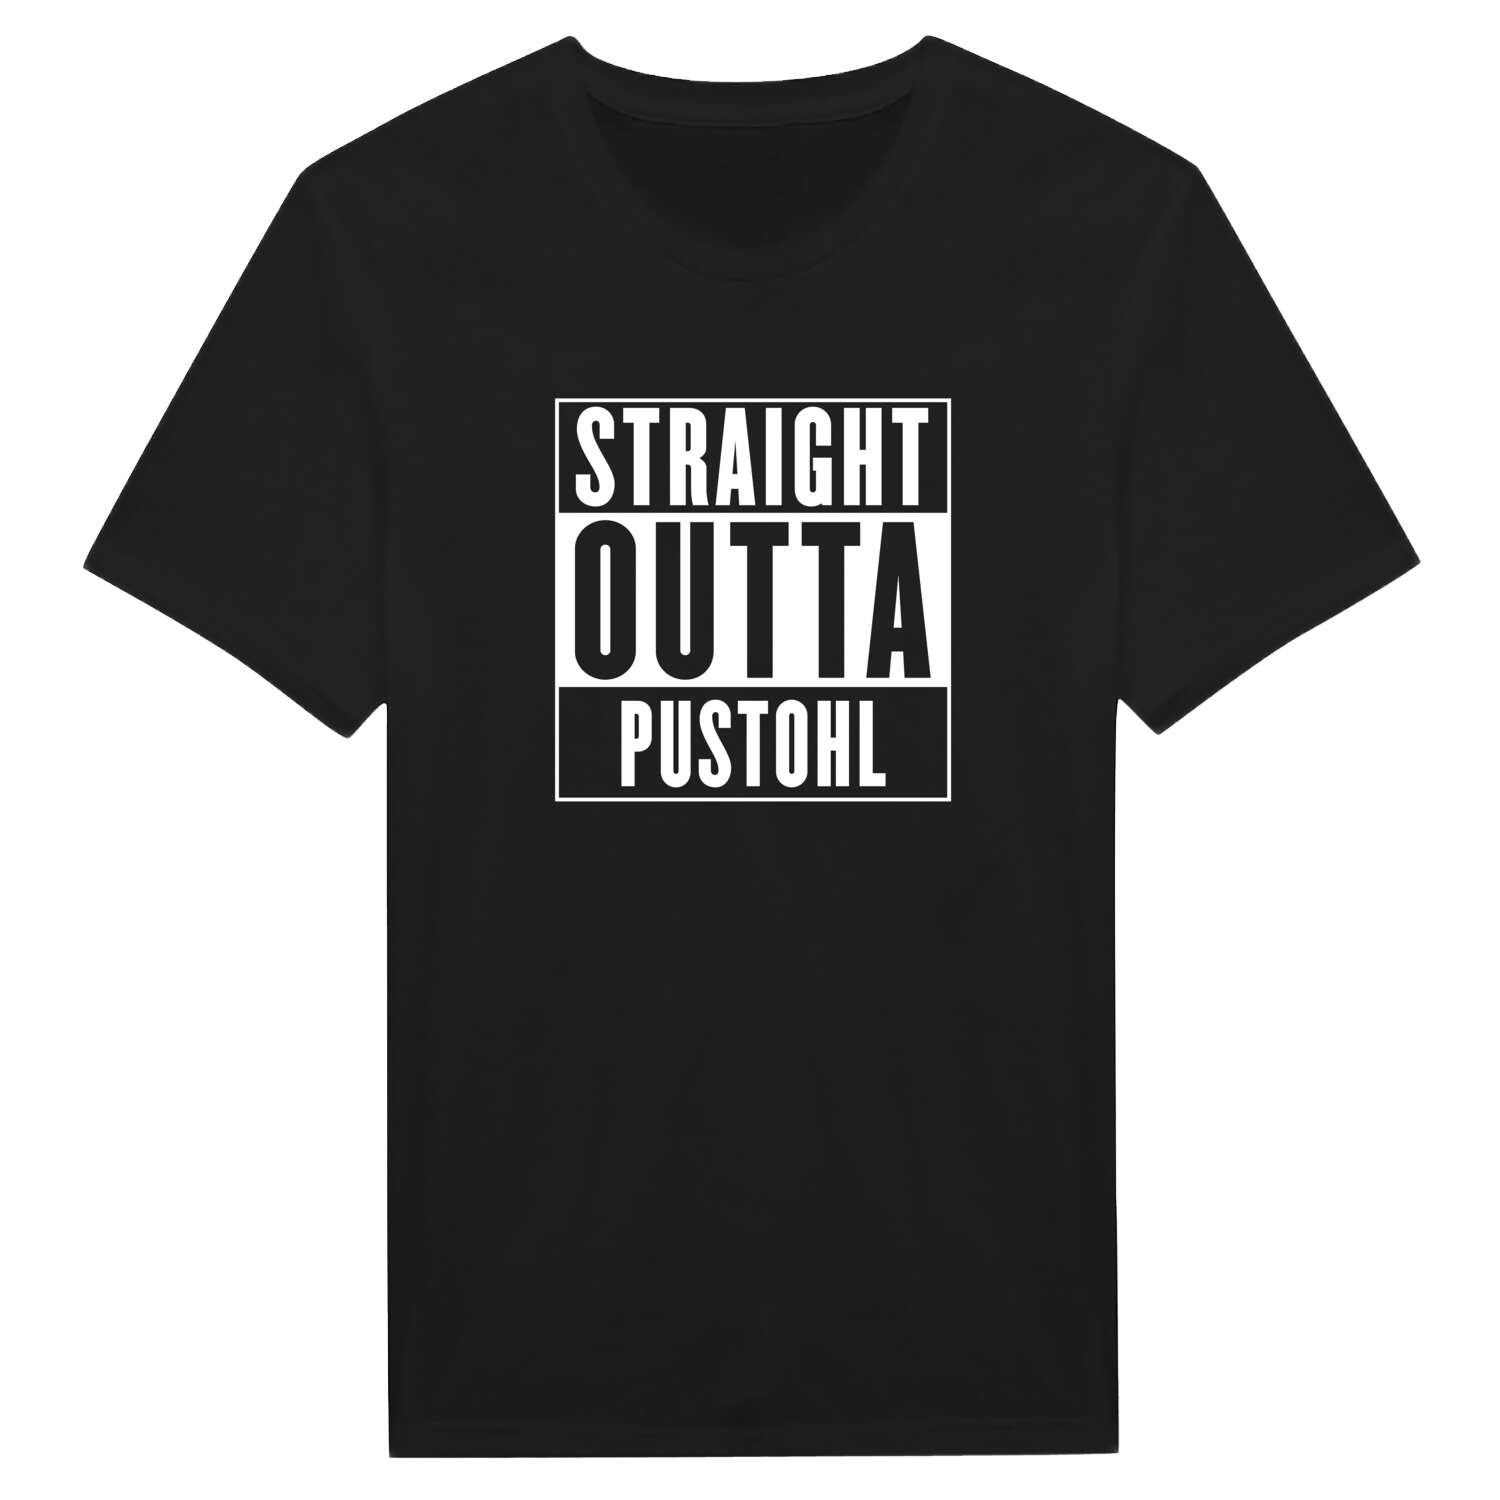 Pustohl T-Shirt »Straight Outta«